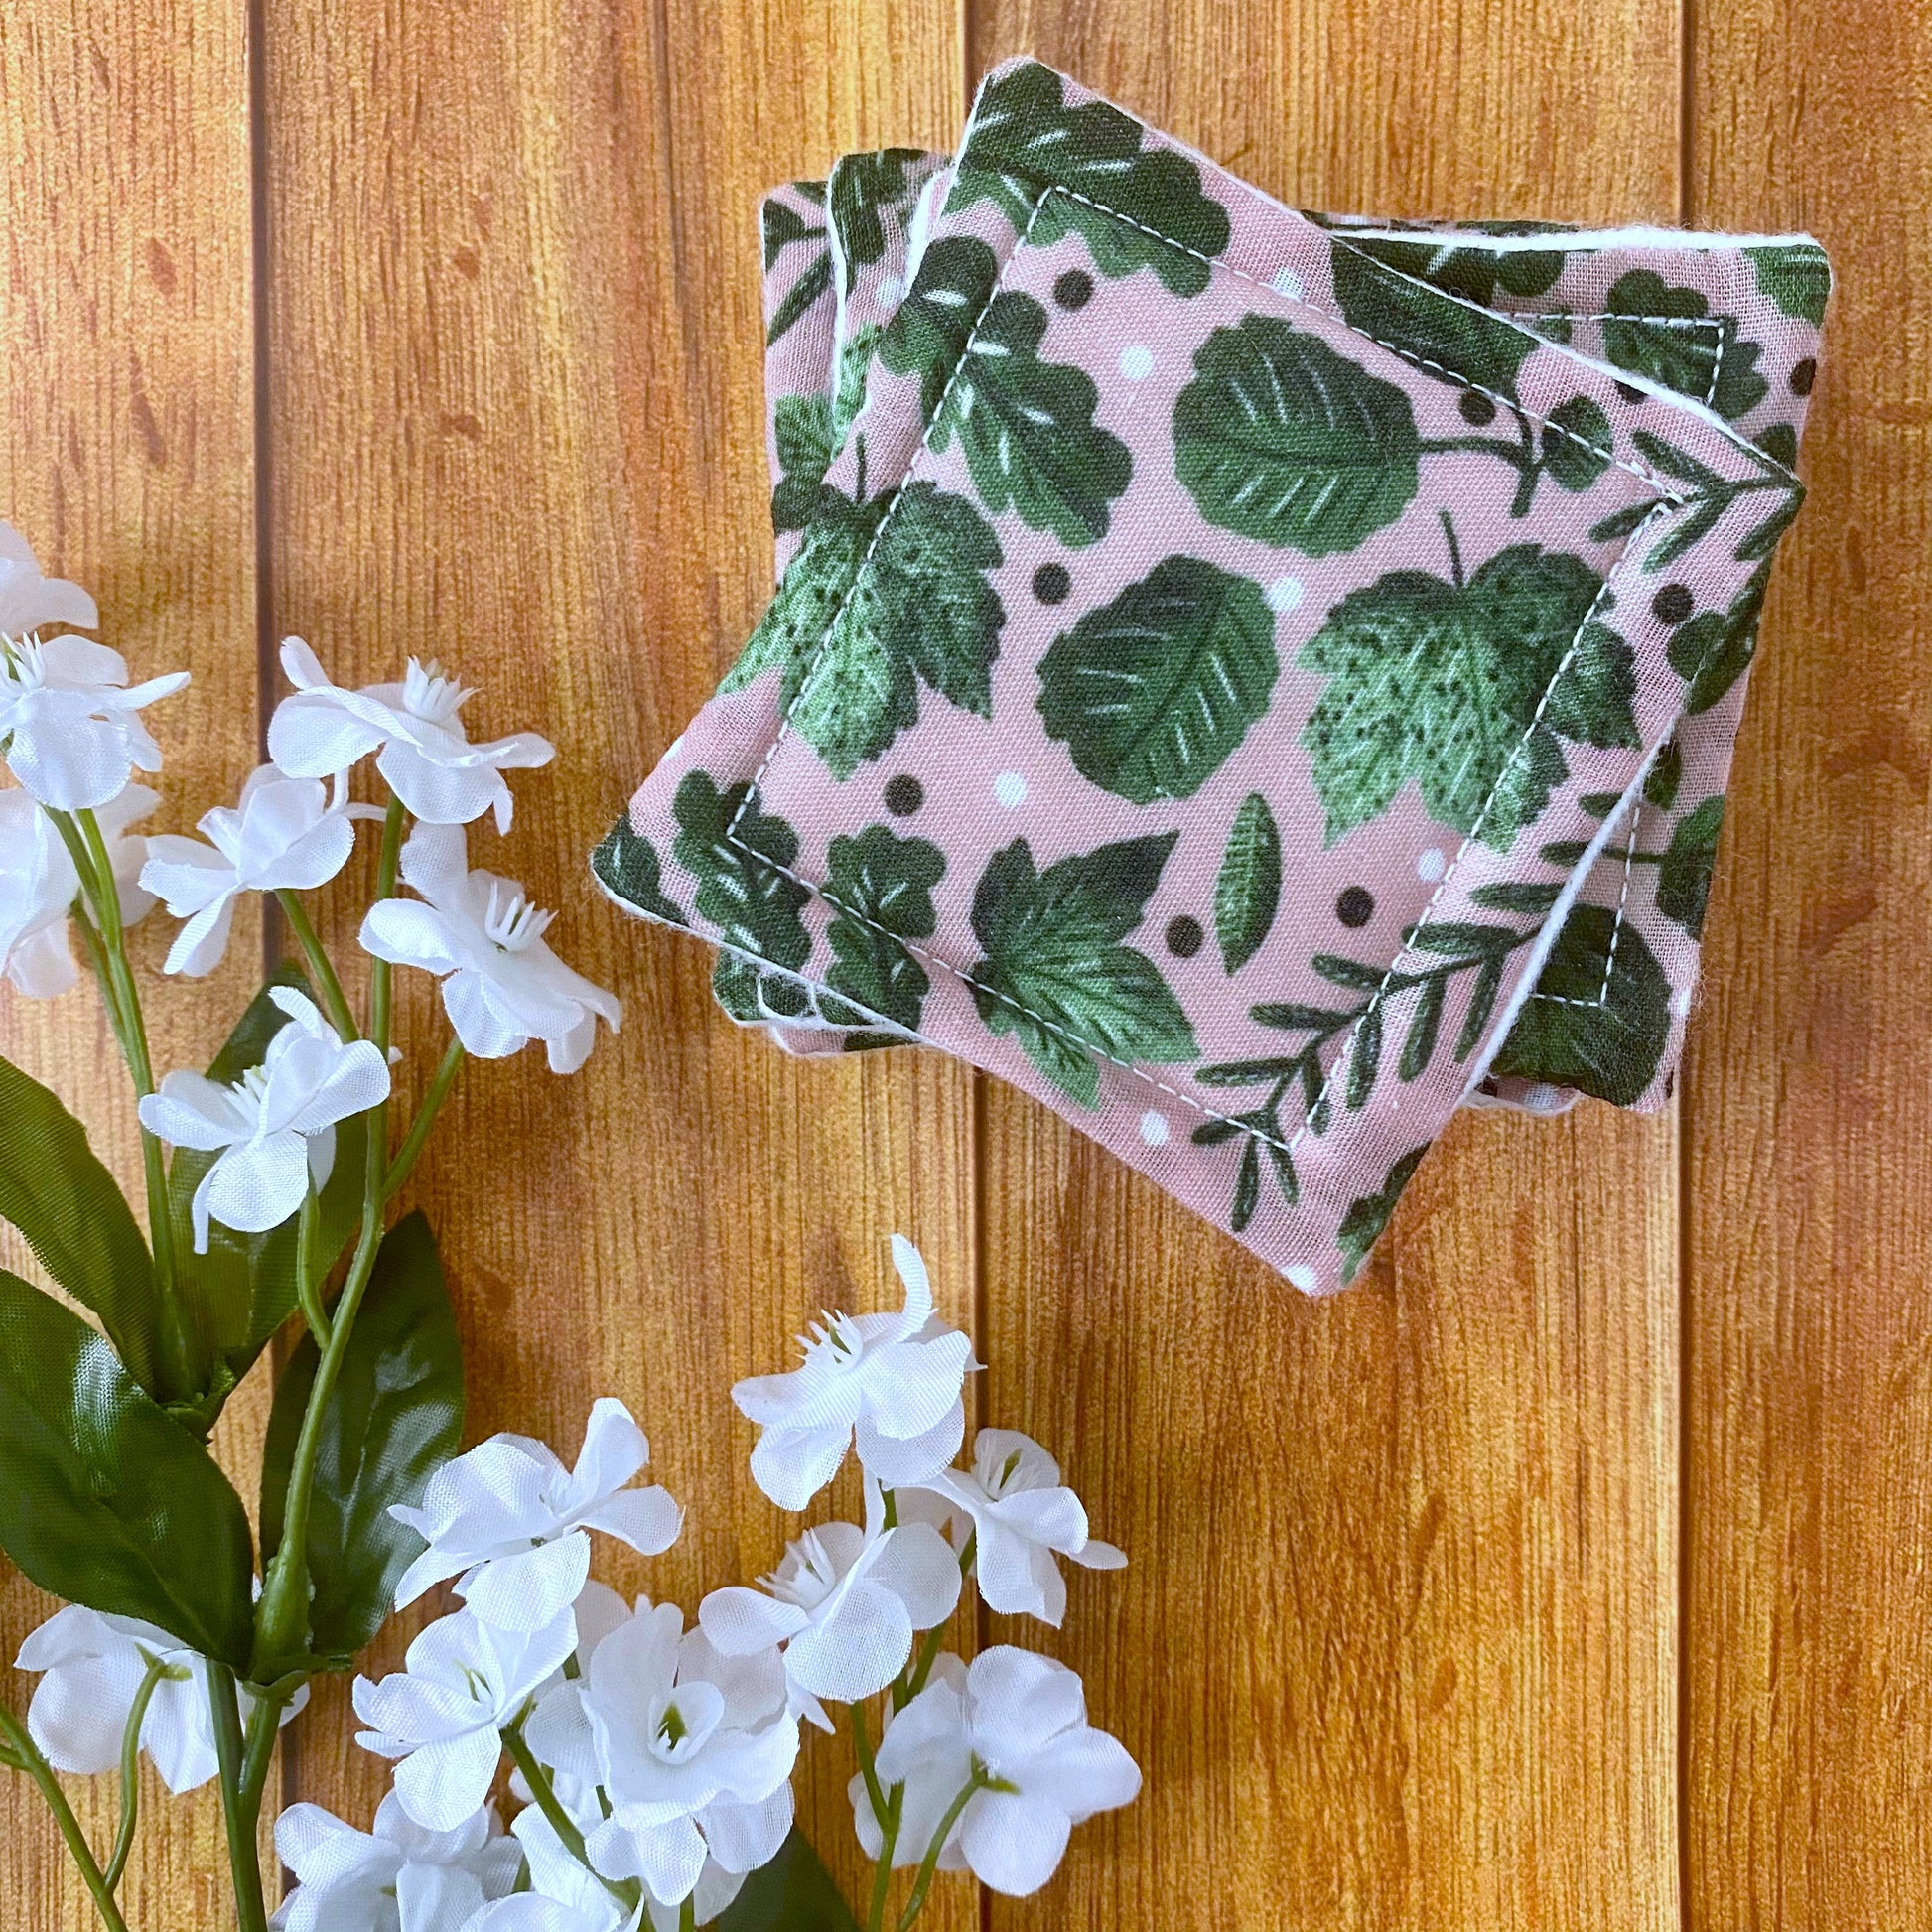 A stack of green foliage patterned skincare pads sat on a wooden background with some flowers around it